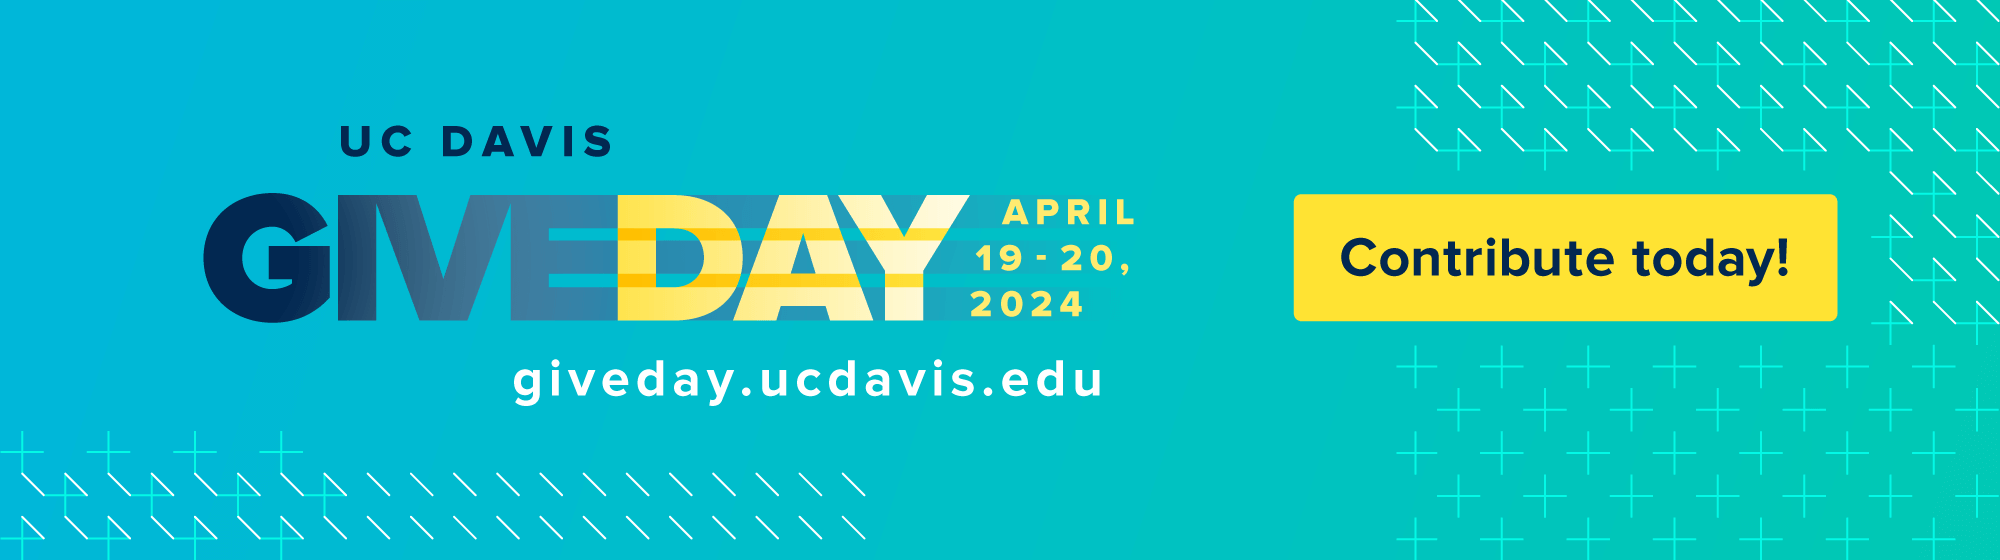 Blue banner with text that reads UC Davis Give Day April 19-20, 2024 Contribute Now